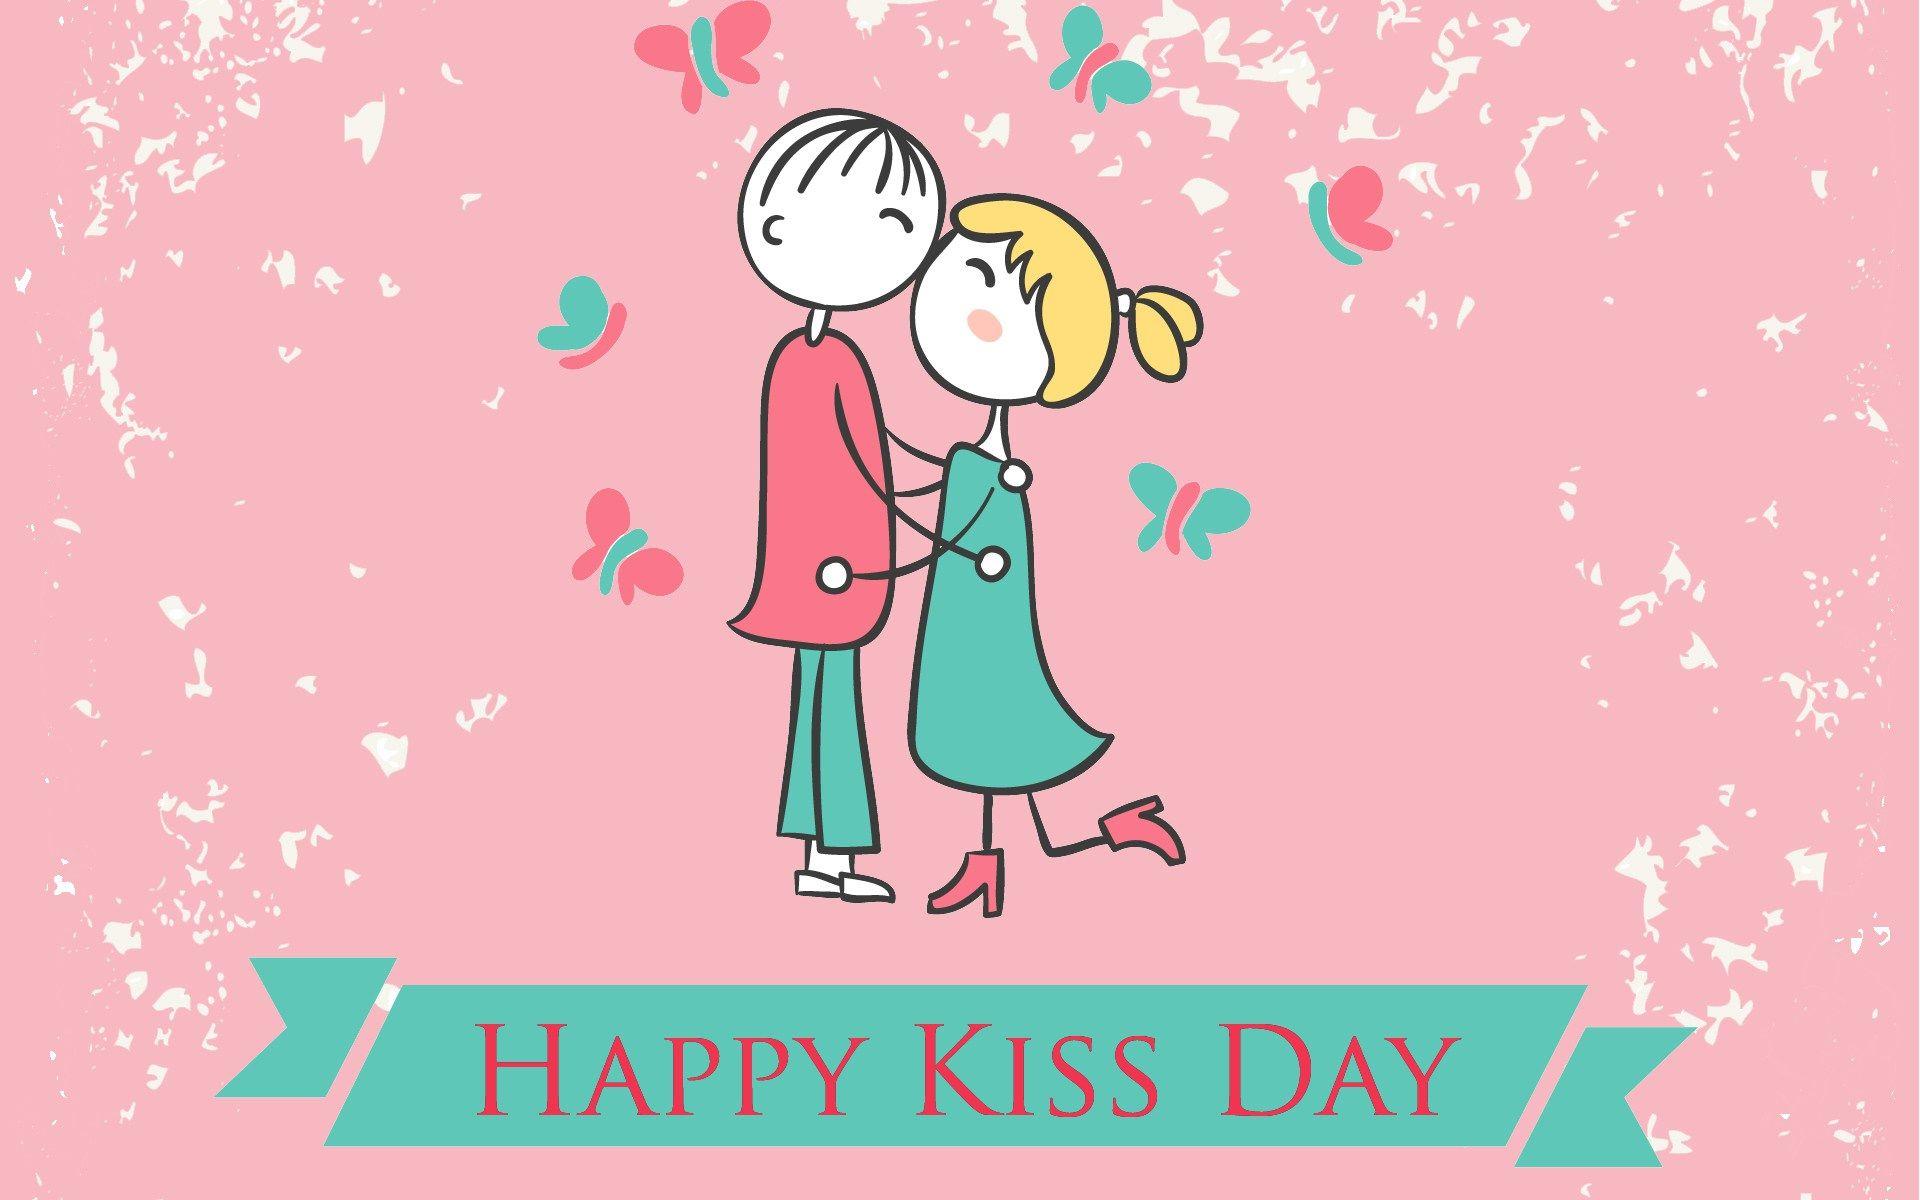 Best Hot Happy Kiss Day Image Shayari Wallpapers Messages For Lovers.